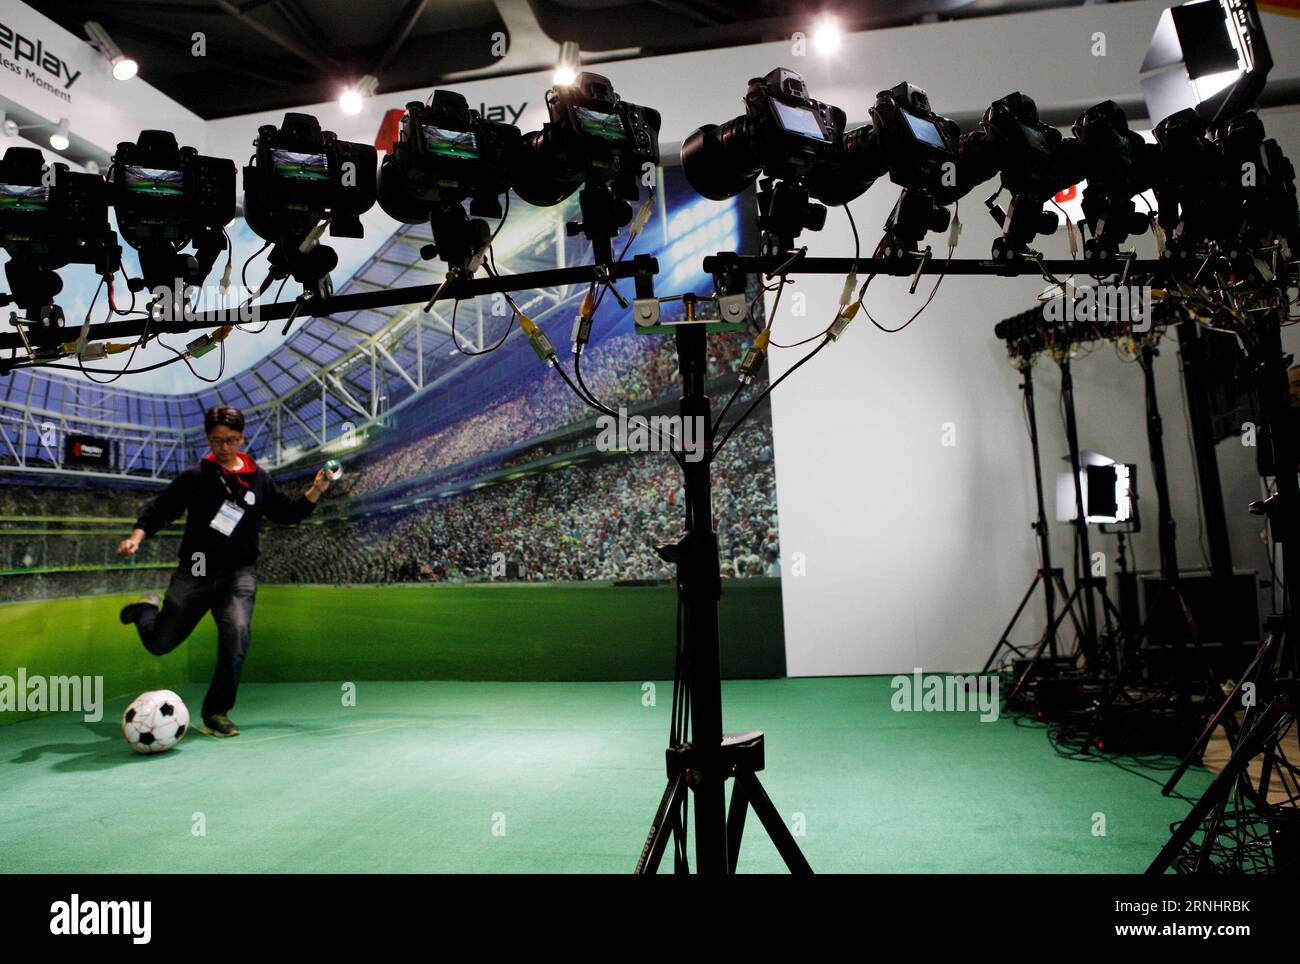 (161207) -- SHANGHAI, Dec. 7, 2016 -- An exhibitor shows a 4D video shooting system at the National Association of Broadcasters (NAB) Show Shanghai held in east China s Shanghai, Dec. 7, 2016. Building on the strength and success of the NAB Show brand and its global influence, Shanghai s show is the premier event for the broadcast and transmedia industry in the Asia and Pacific region. ) (wx) CHINA-SHANGHAI-NAB SHOW (CN) FangxZhe PUBLICATIONxNOTxINxCHN   Shanghai DEC 7 2016 to exhibitor Shows a 4D Video Shooting System AT The National Association of Broadcasters NAB Show Shanghai Hero in East Stock Photo